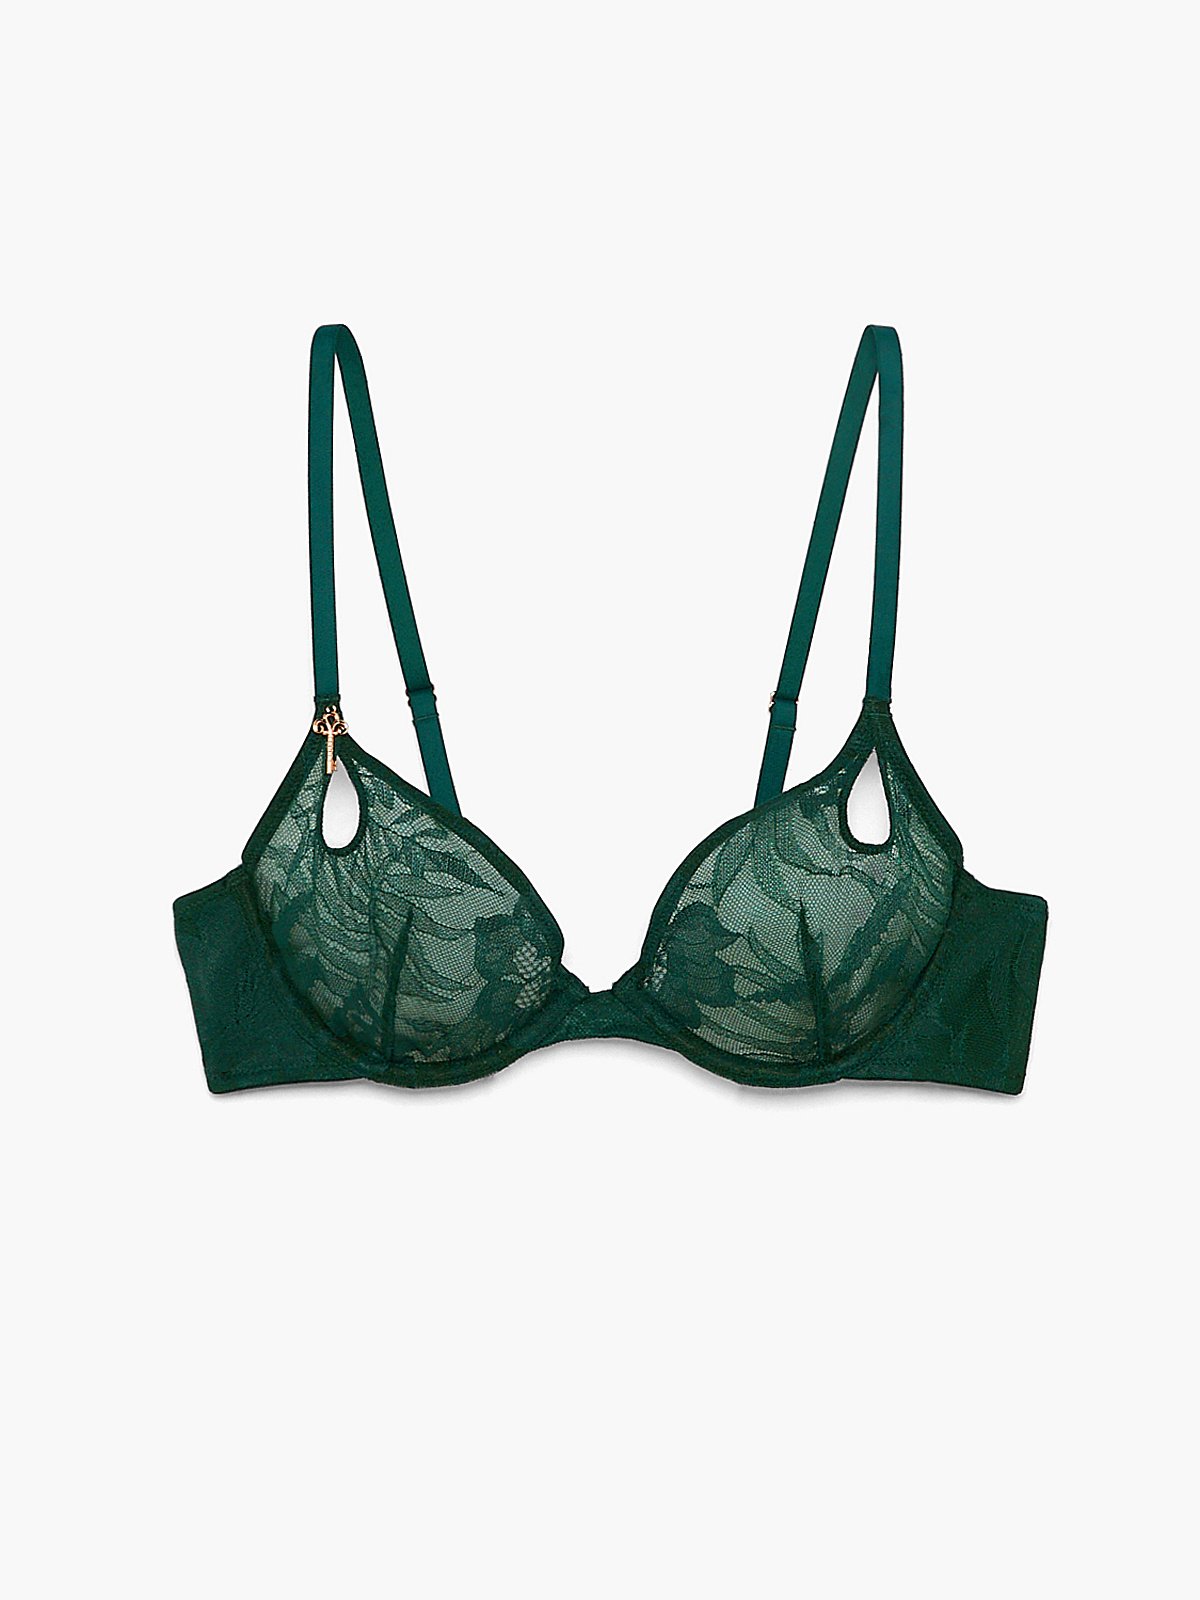 Bras N Things on X: The Enchanted Sia underwire bra and high waist v  string set is designed in sumptuous black lace and green satin. Shop the  look:   / X